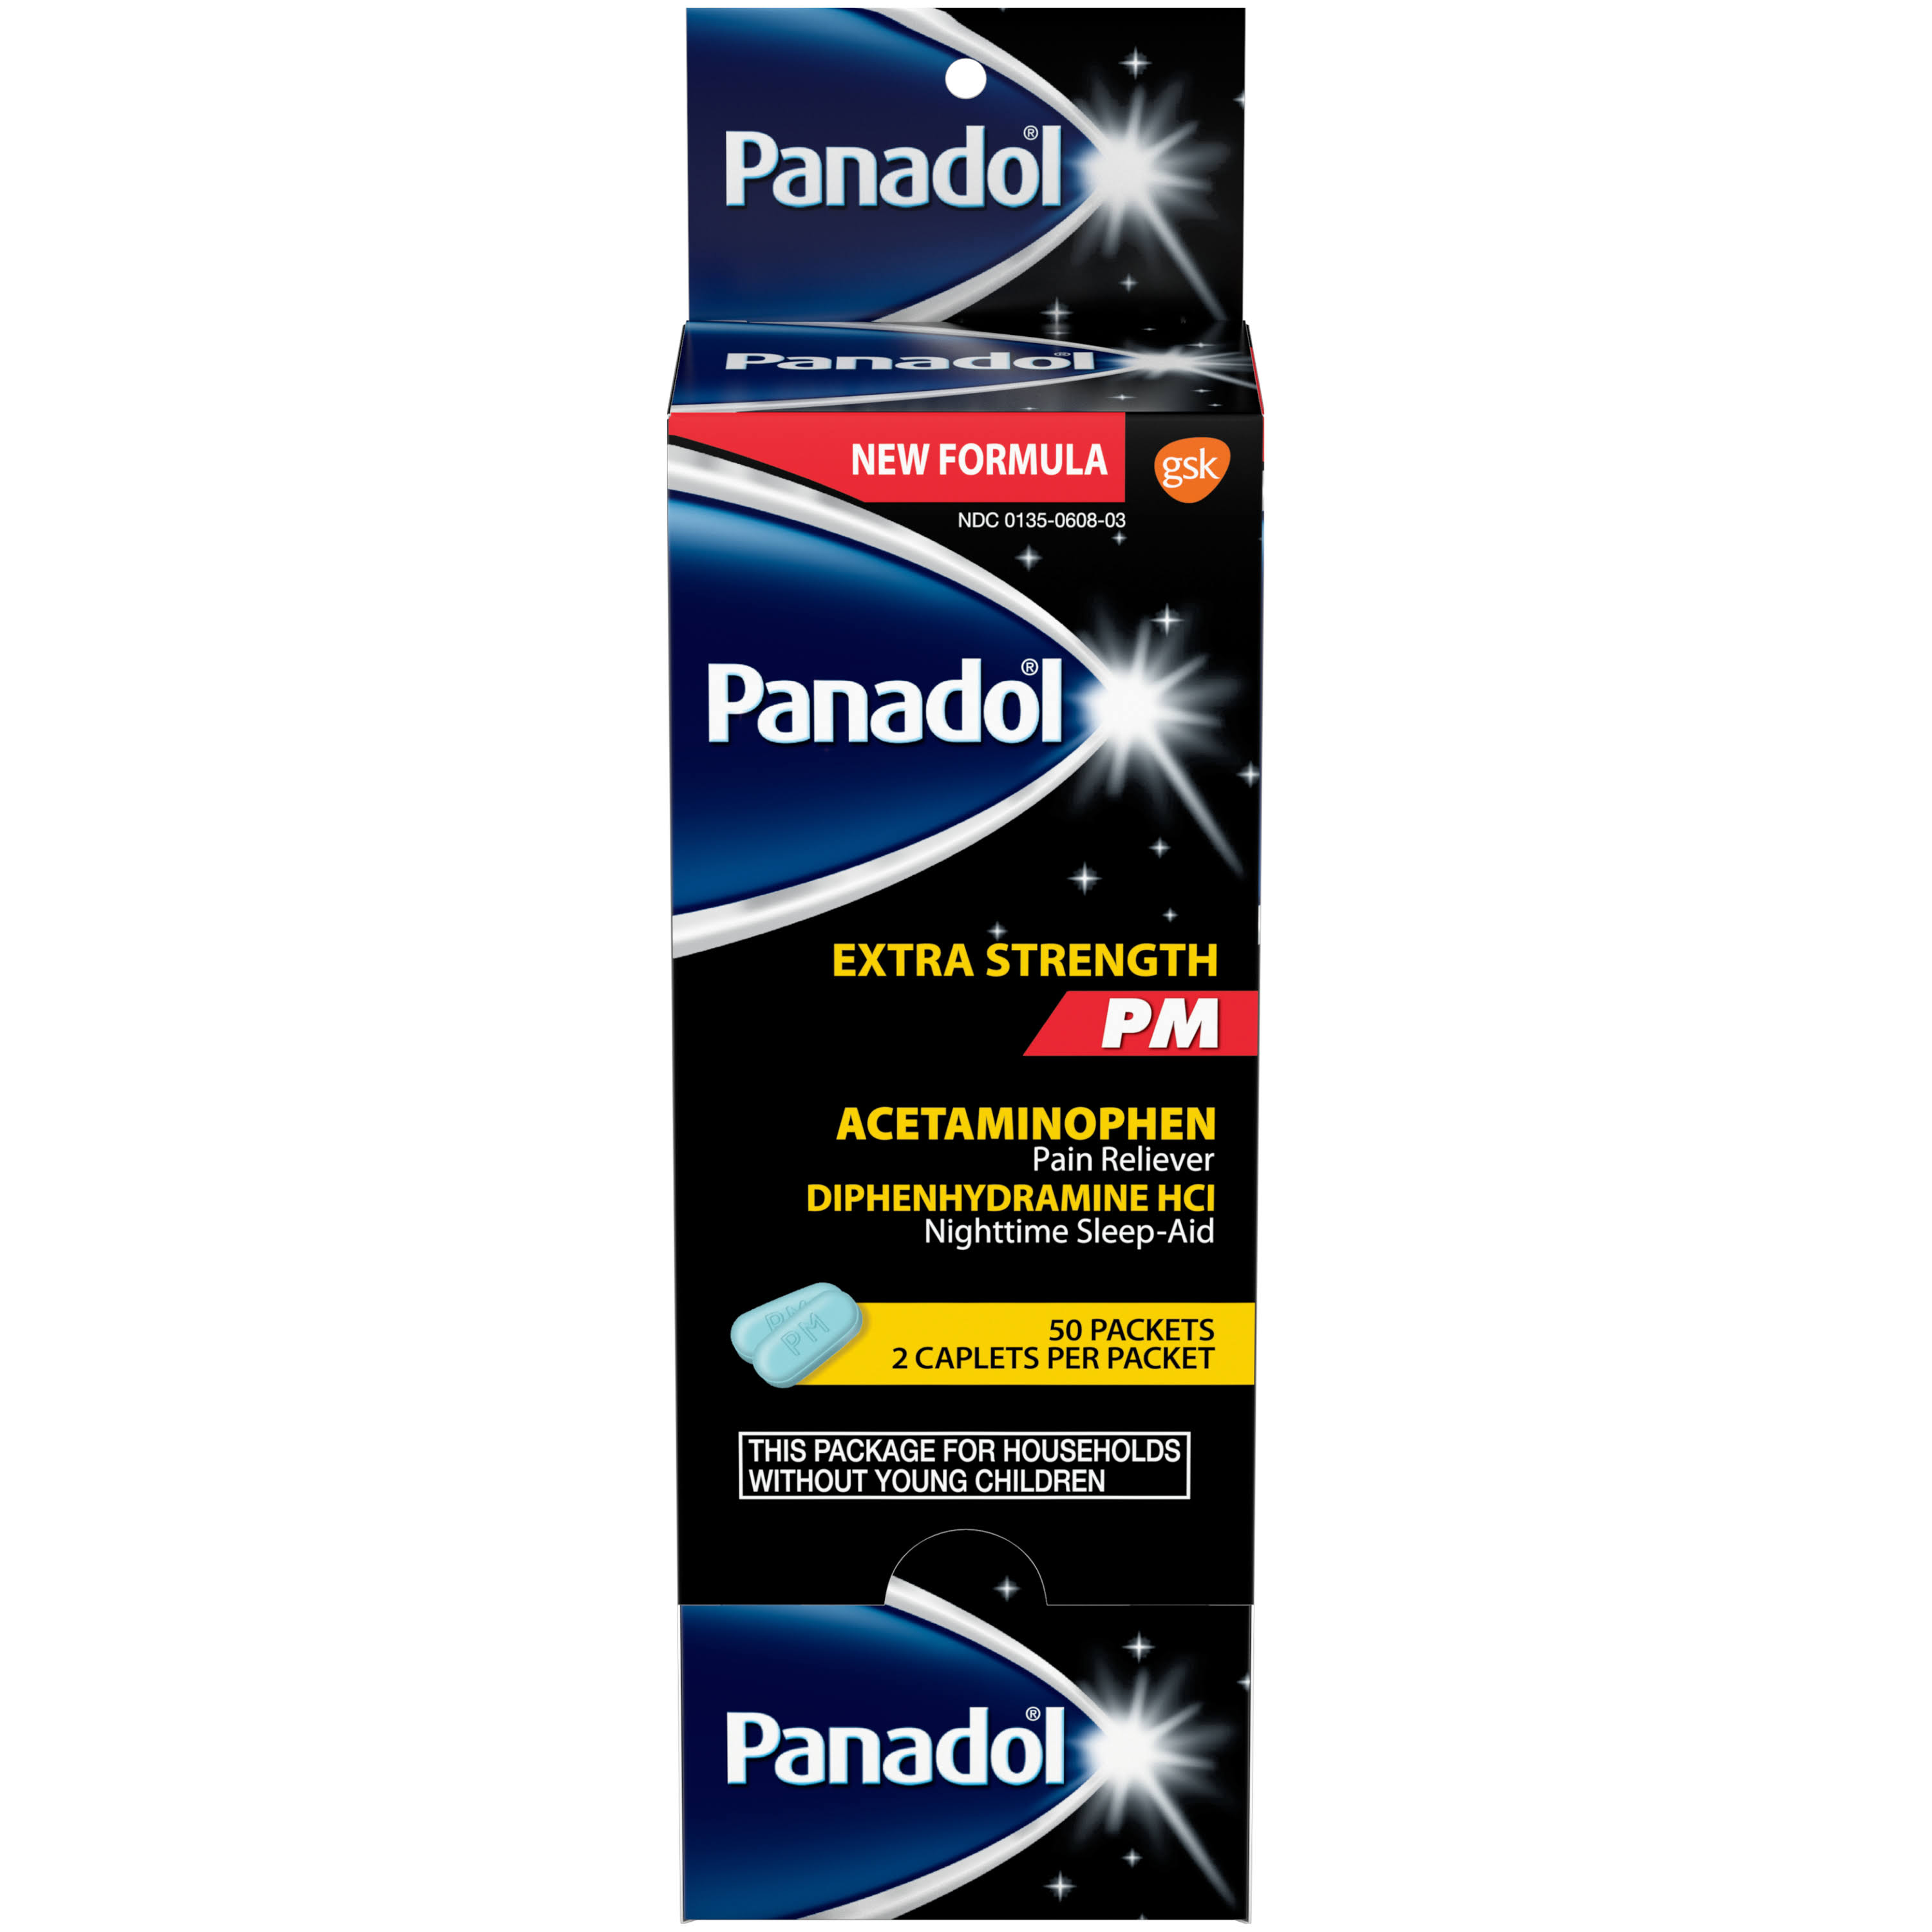 Panadol Extra Strength PM Sleeping Aid Pain Reliever - 20 Caplets